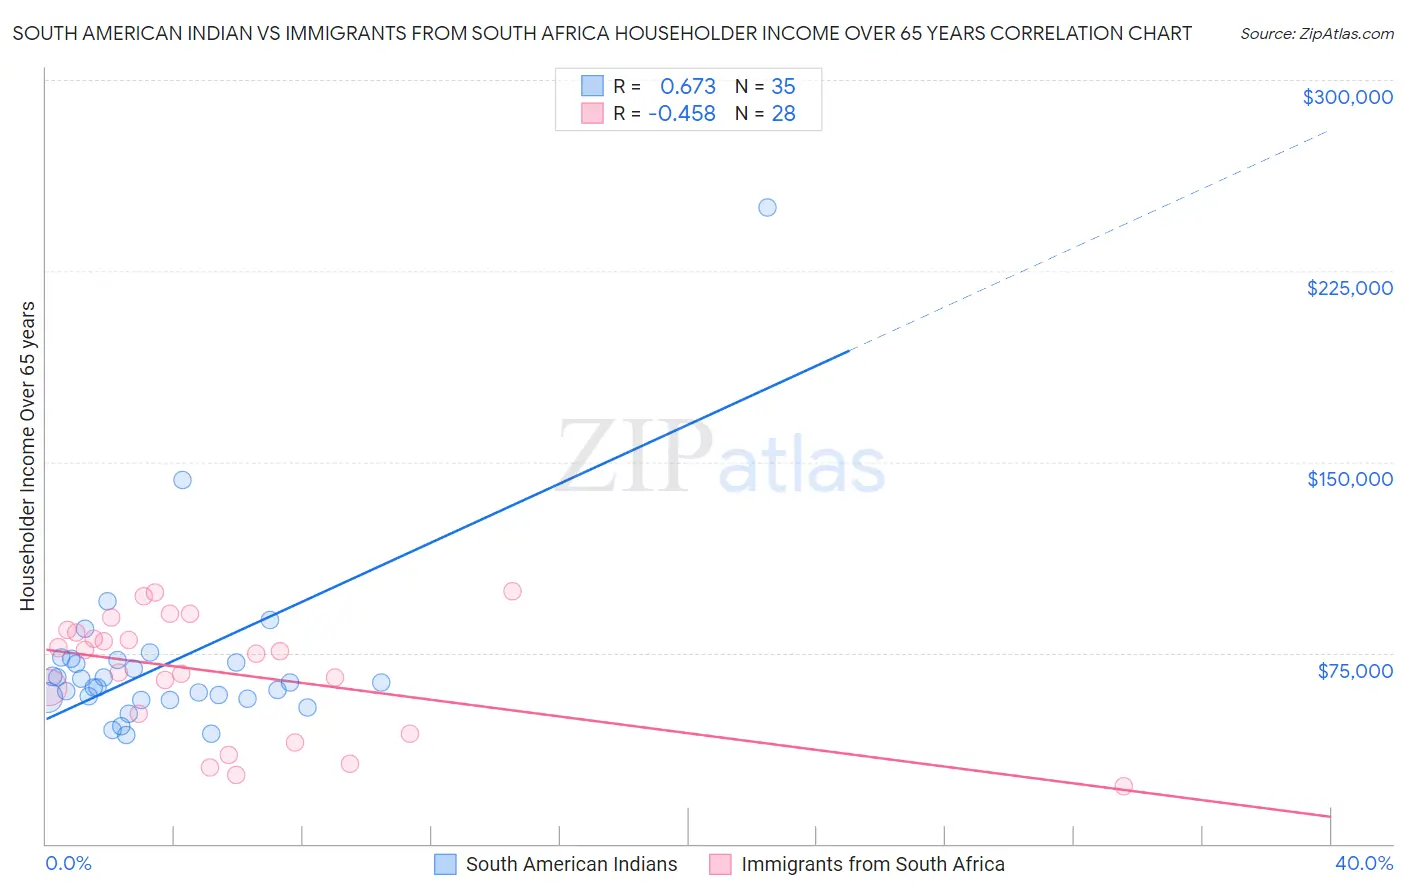 South American Indian vs Immigrants from South Africa Householder Income Over 65 years